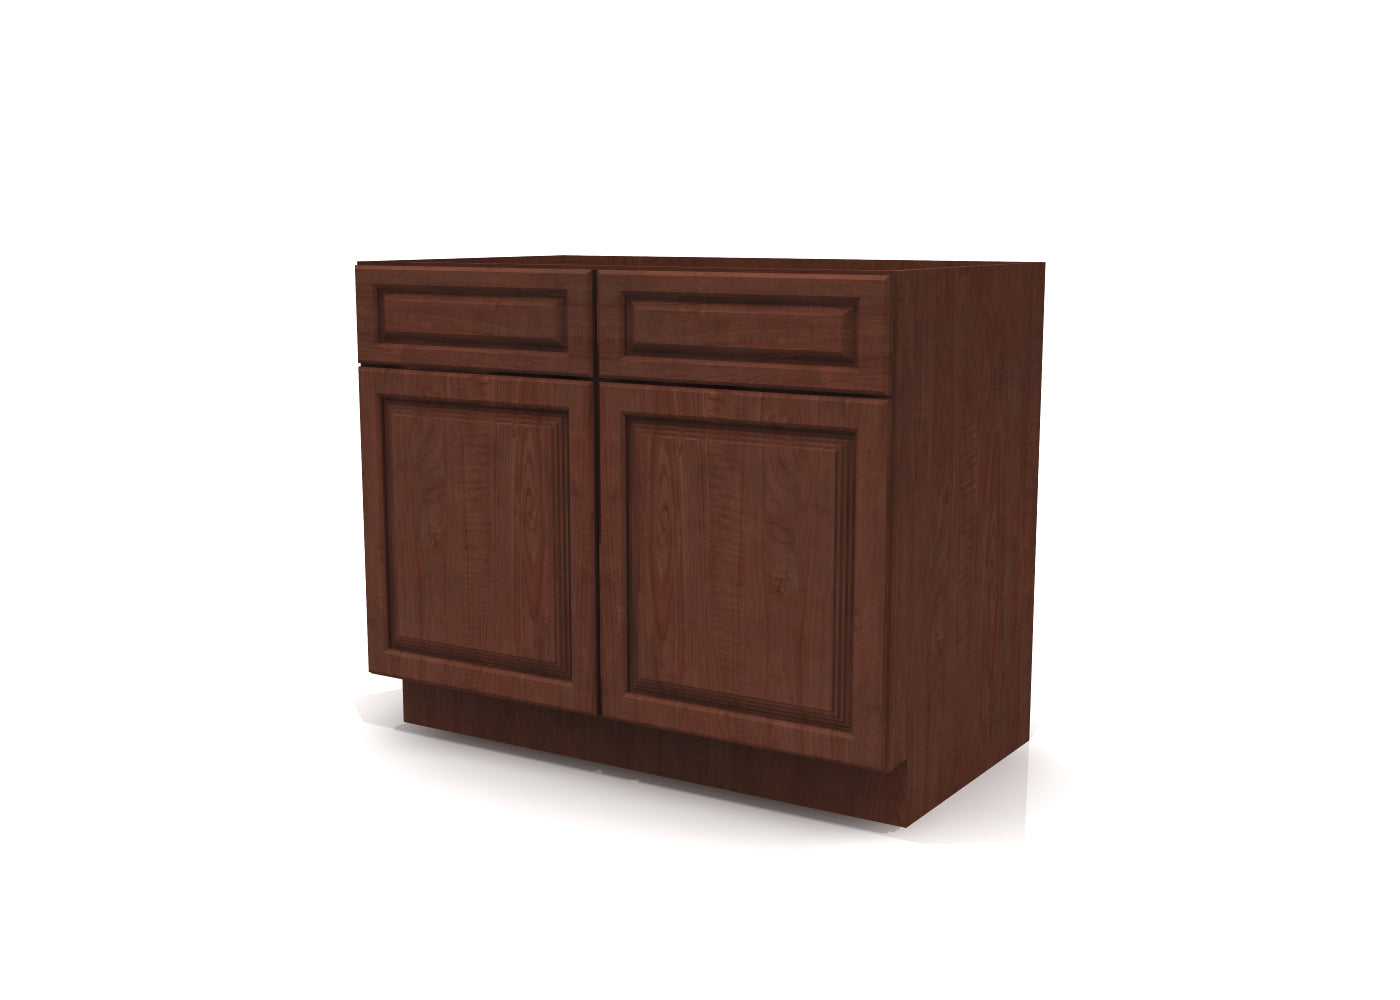 Base Double Door Two Drawers 42" Wide Cherry Raised Panel Cabinet